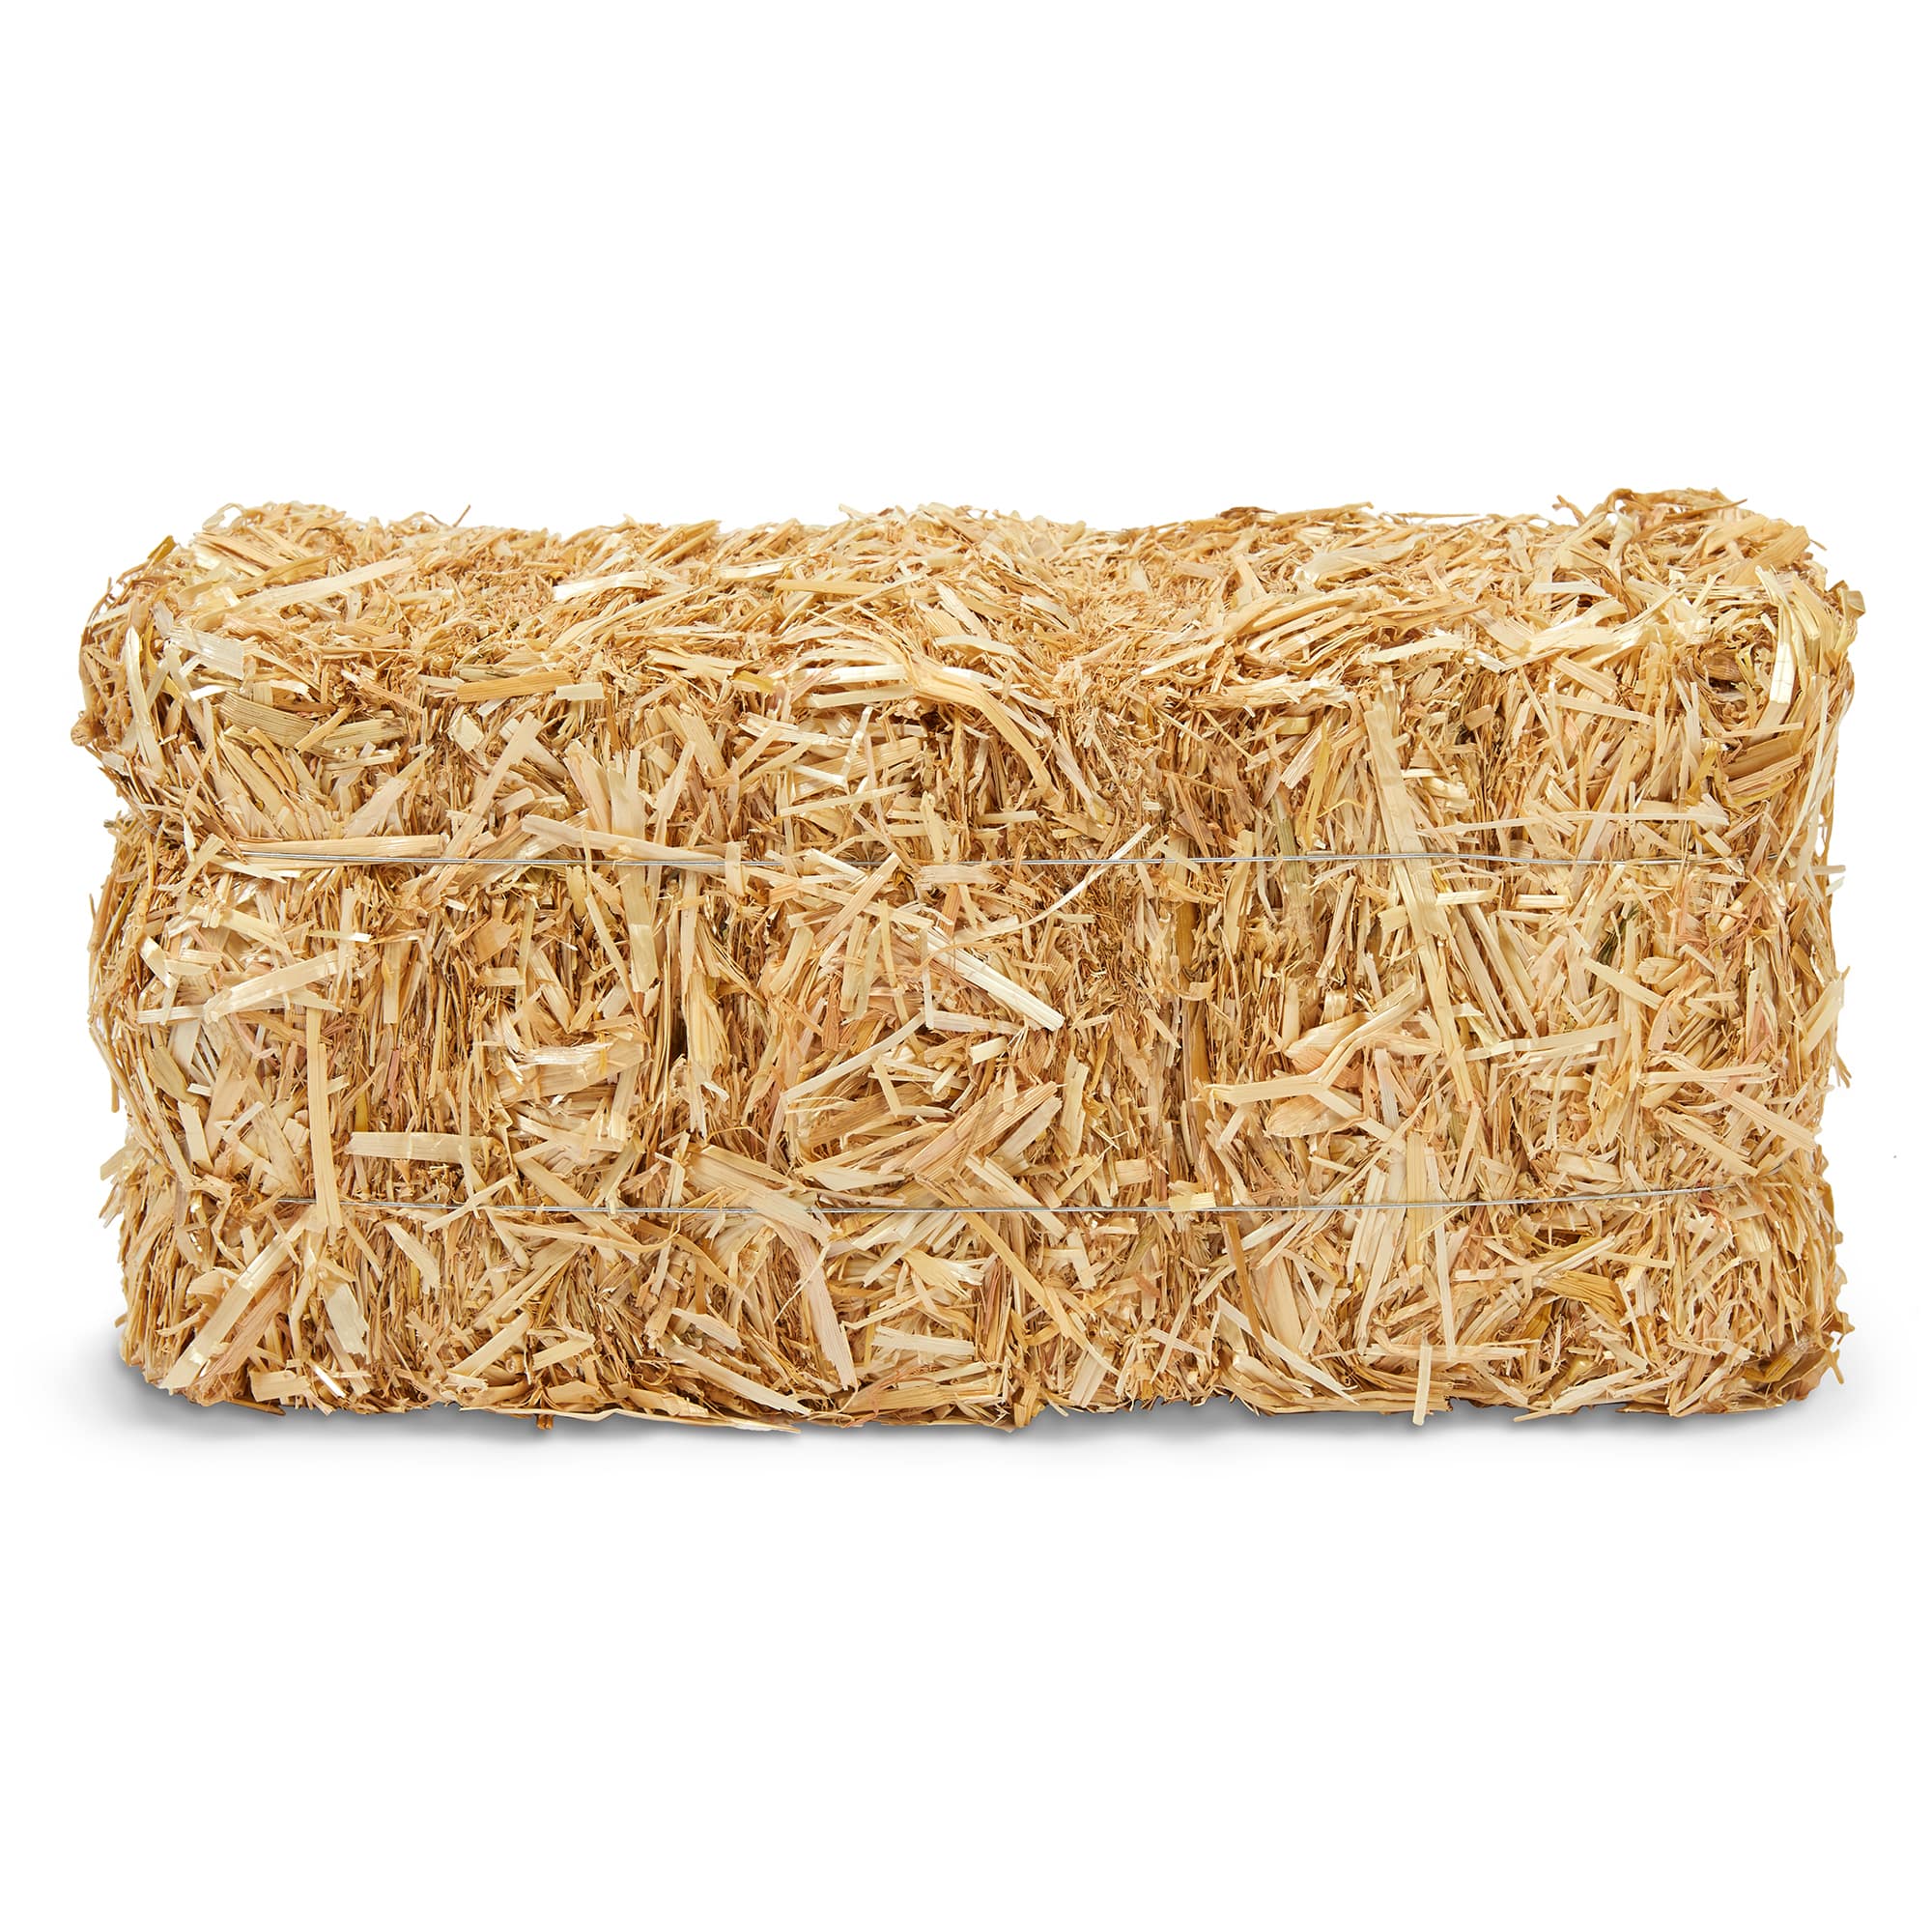  Straw Bales For Decorating